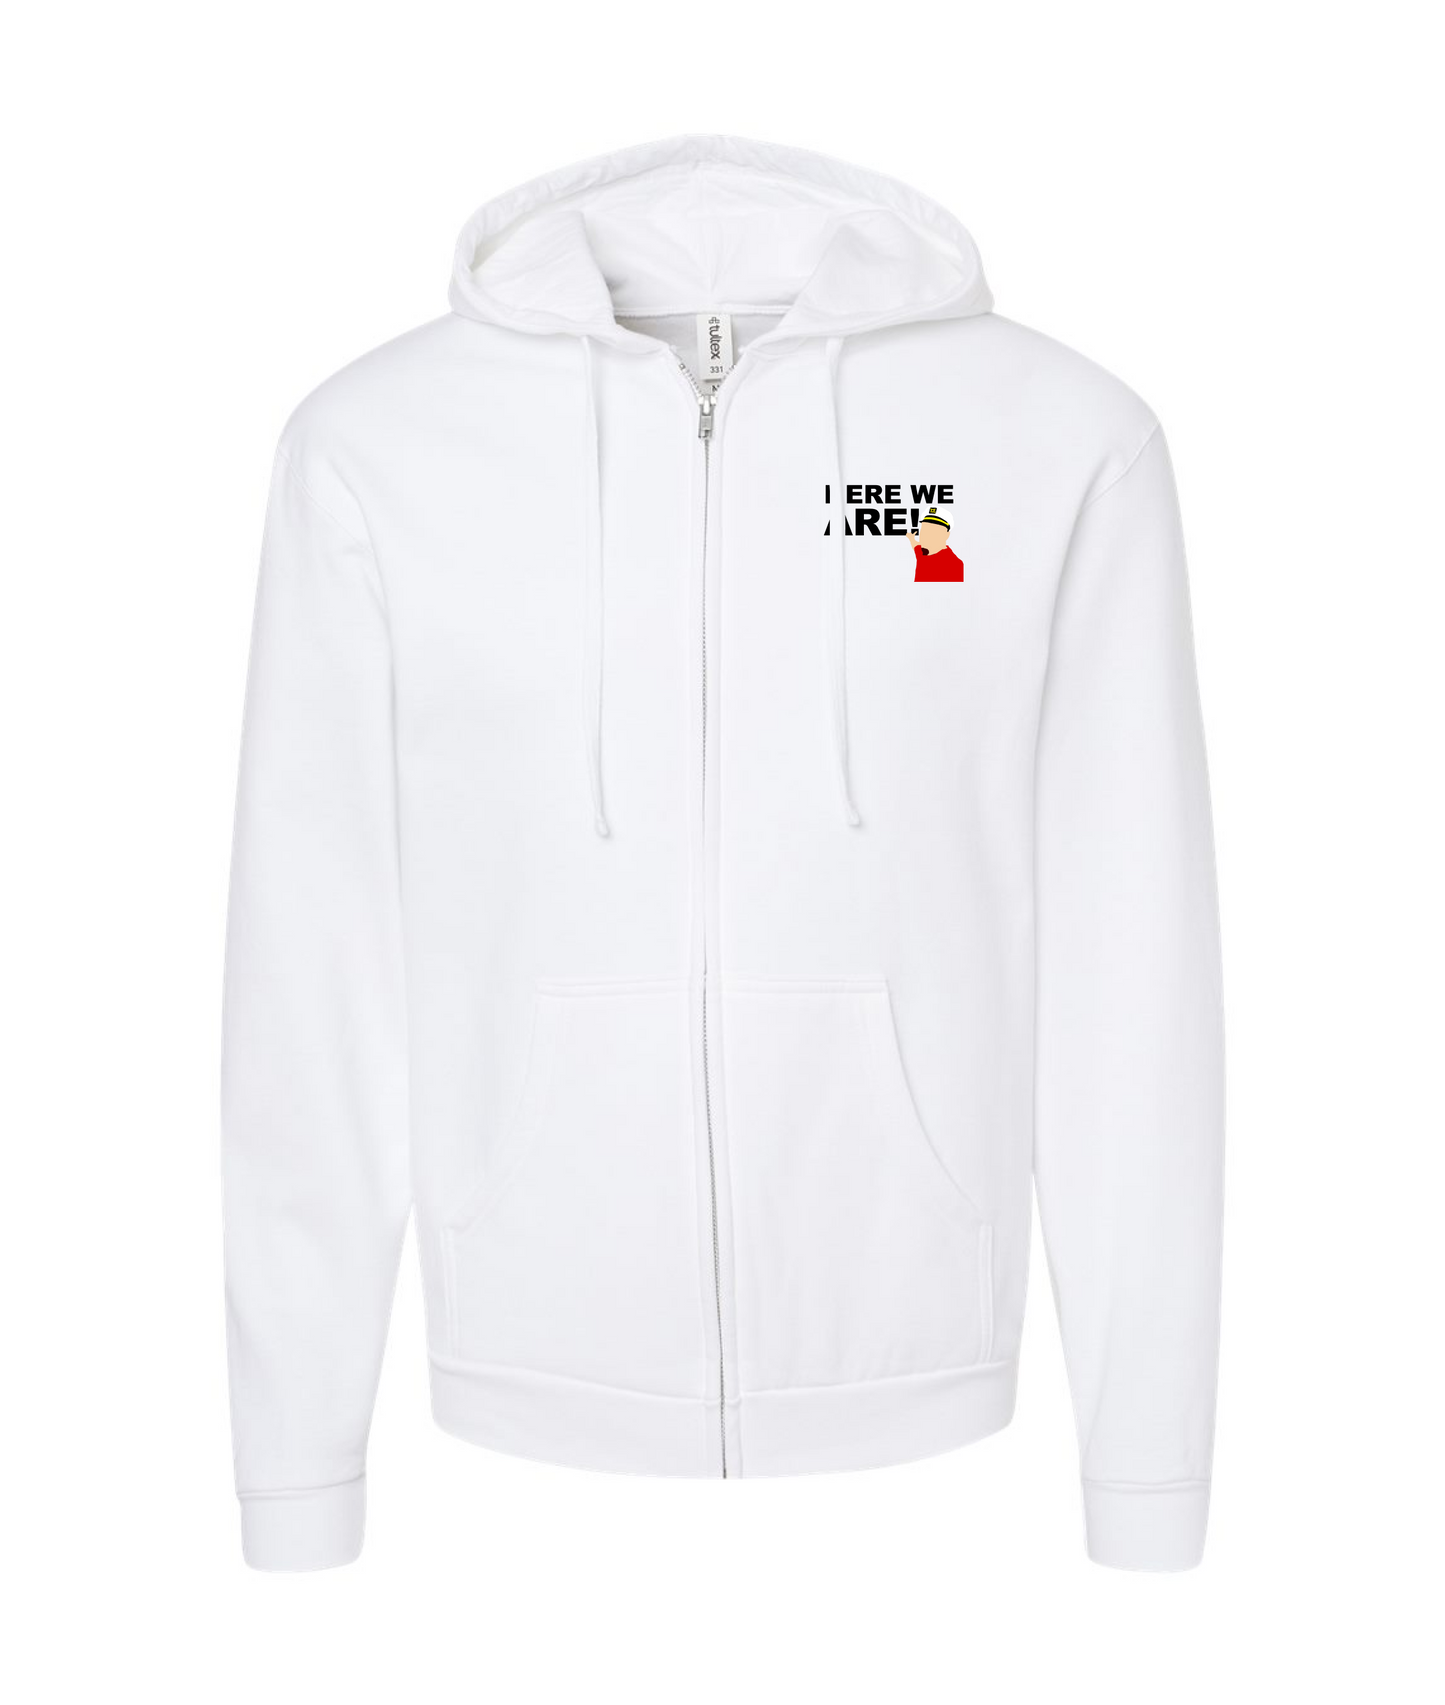 The Philly Captain's Merch is Fire - Here We Are - White Zip Hoodie